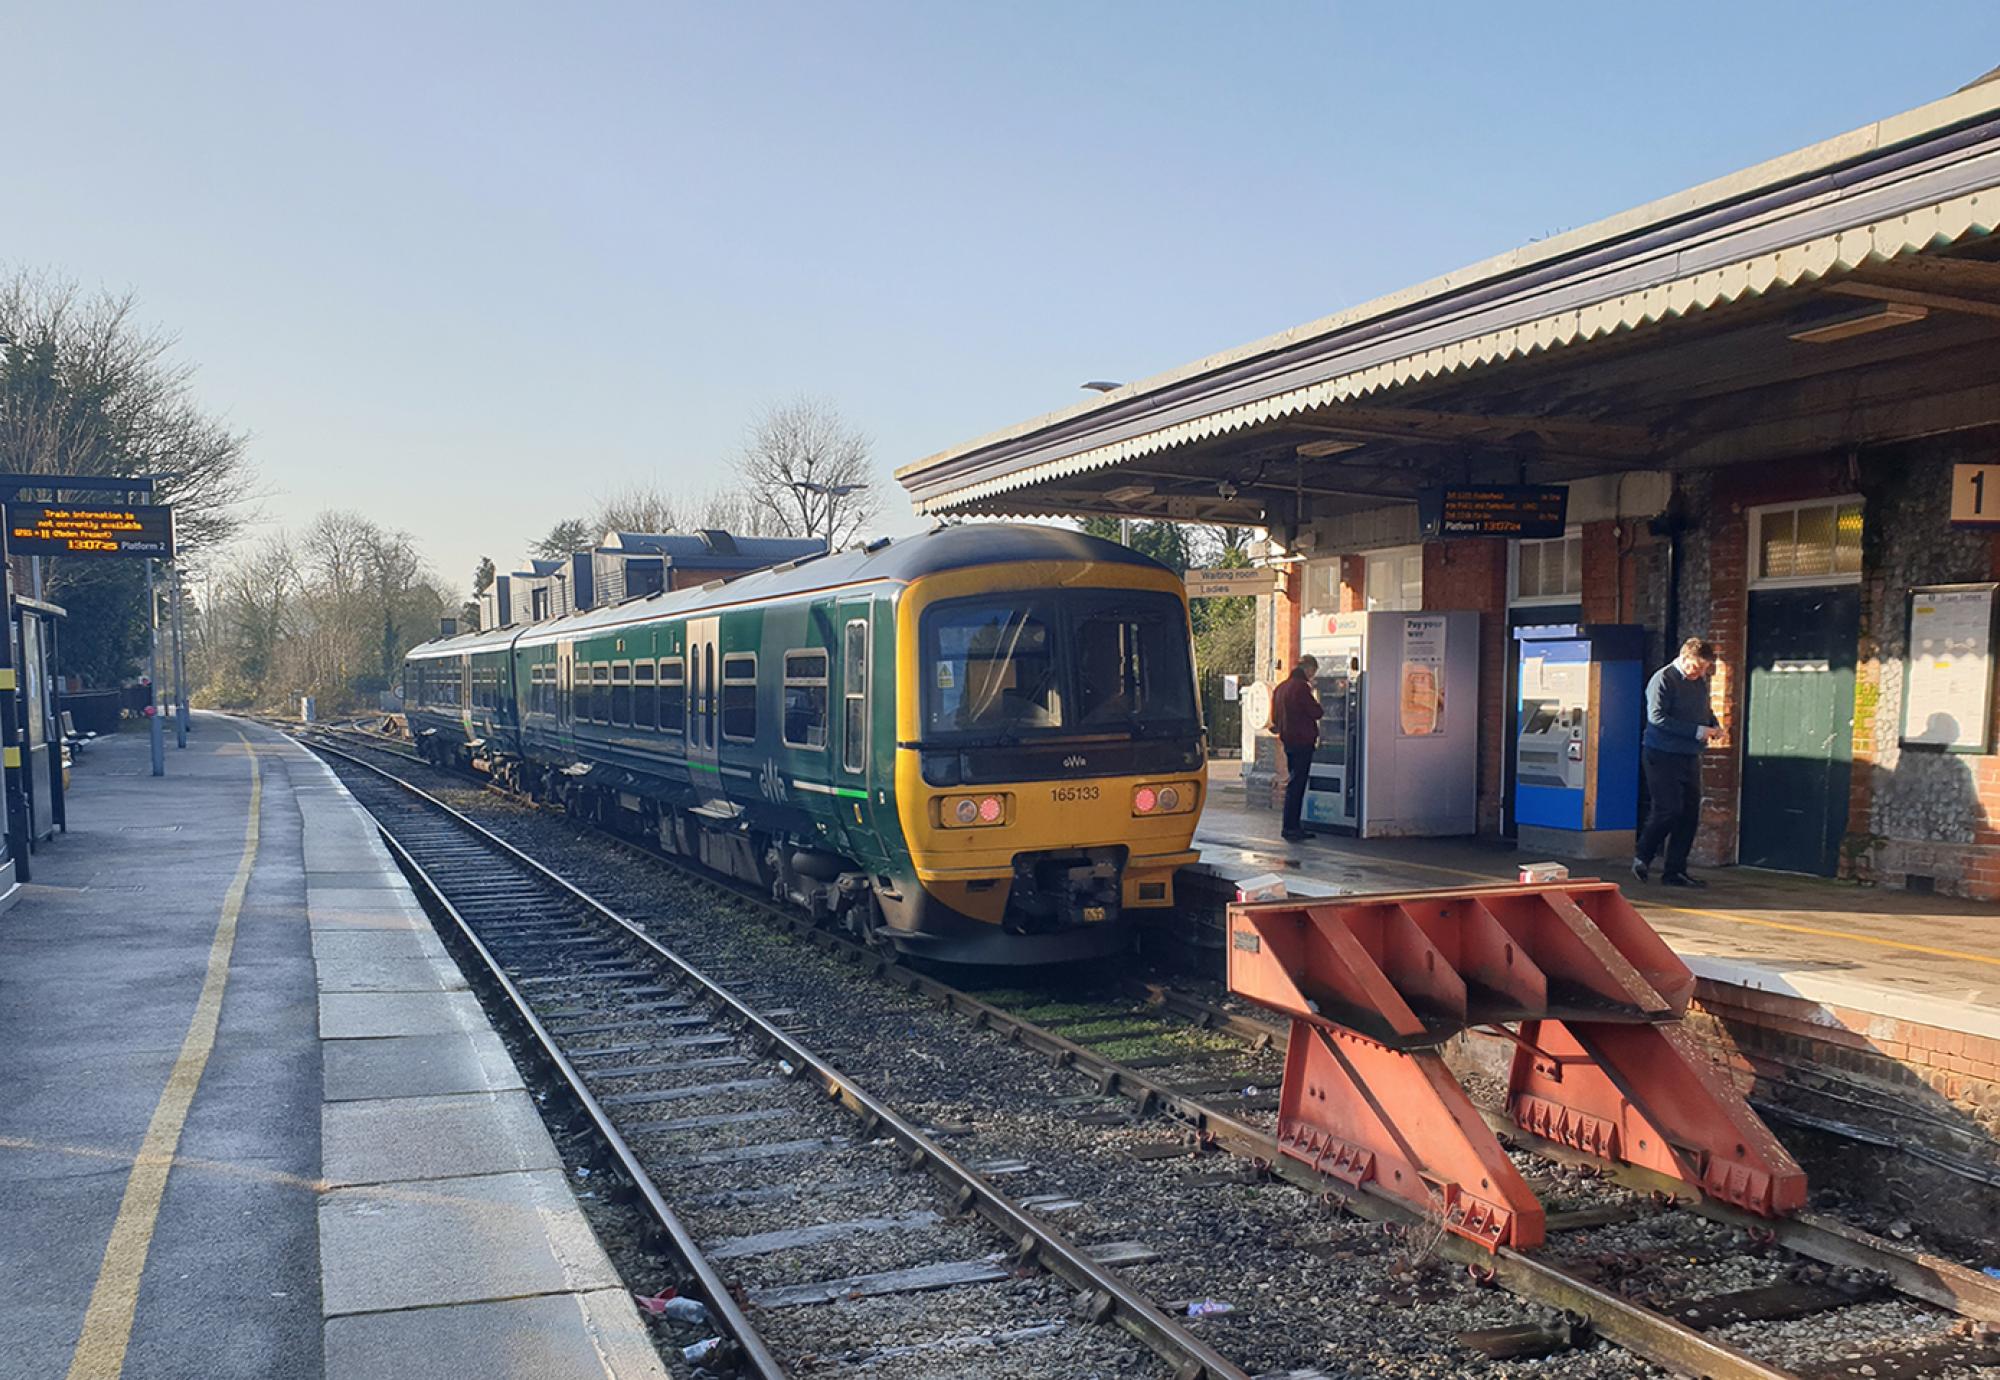  Bourne End railway station with Turbo 165 train 